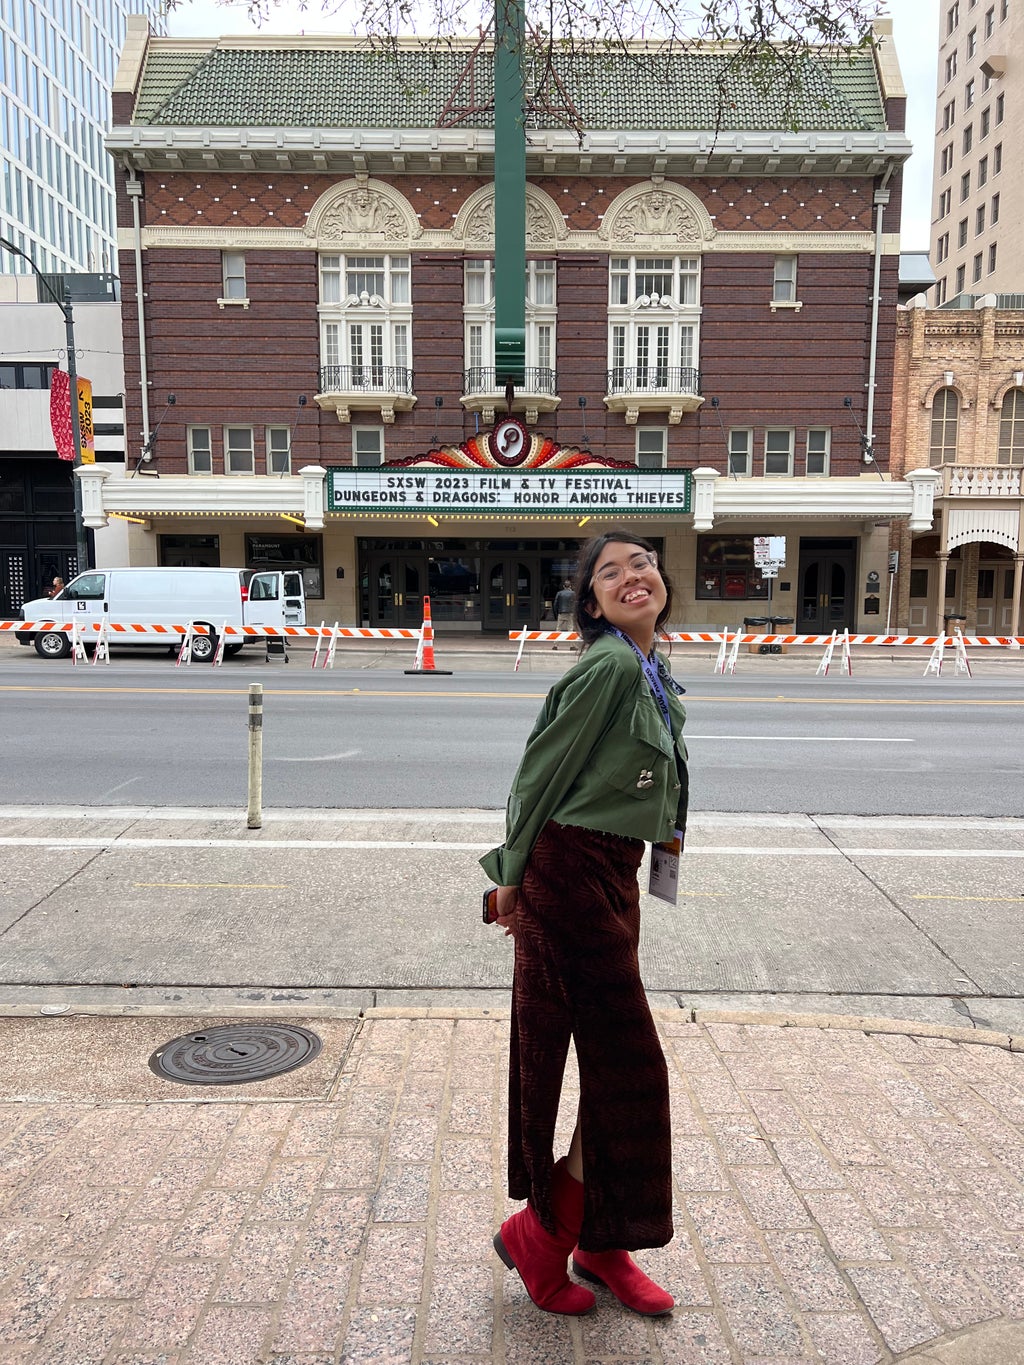 leia standing in front of the paramount